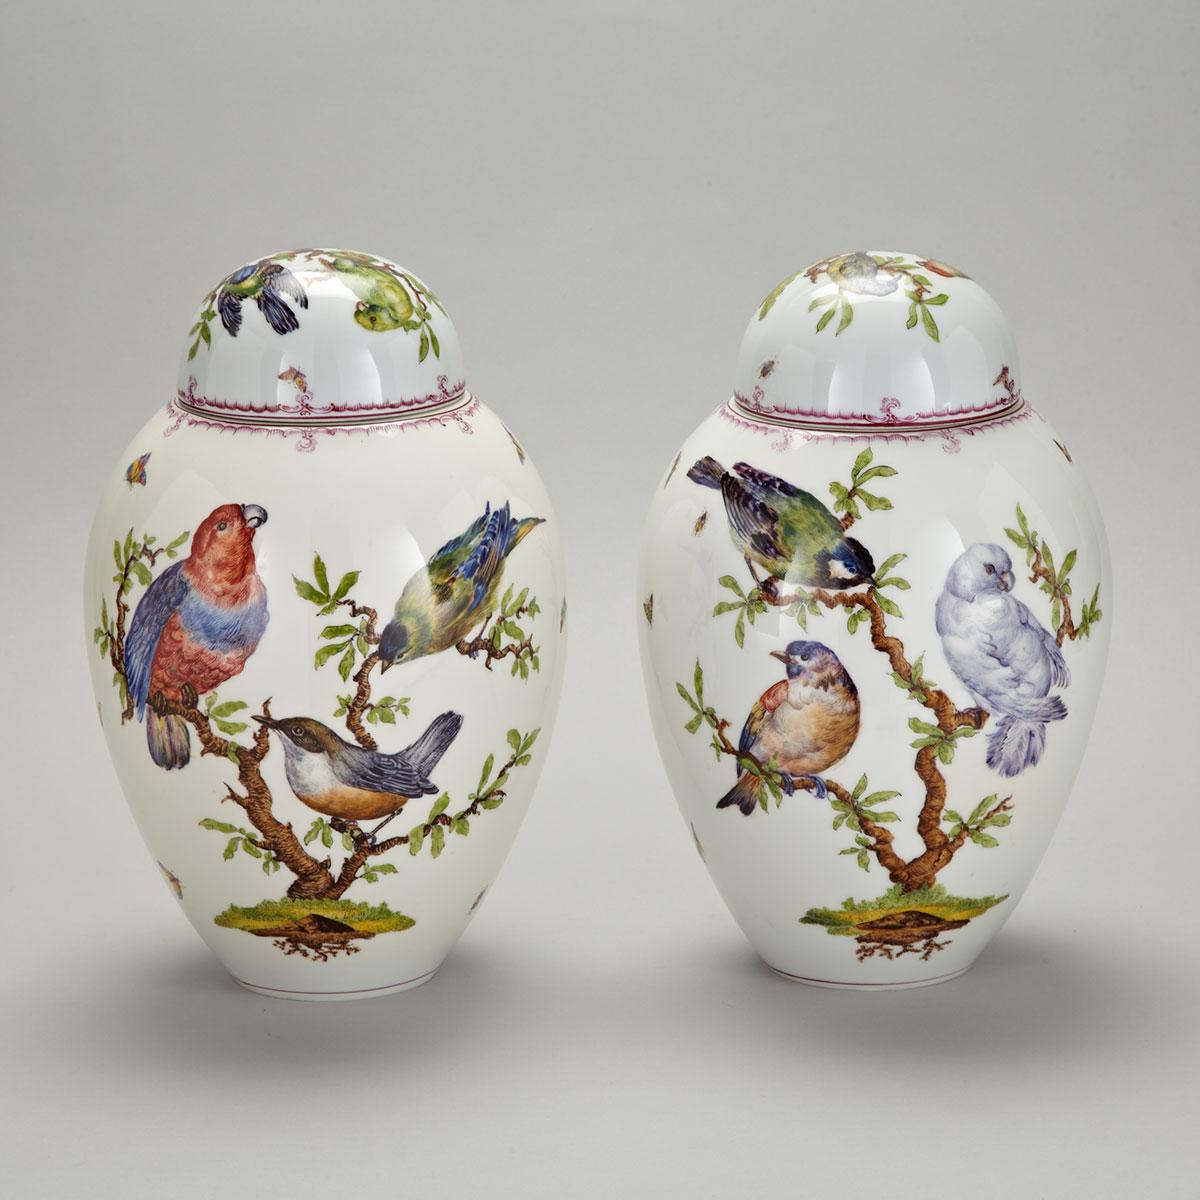 Pair of Carl Theime Potschappel Vases with Covers, early 20th century